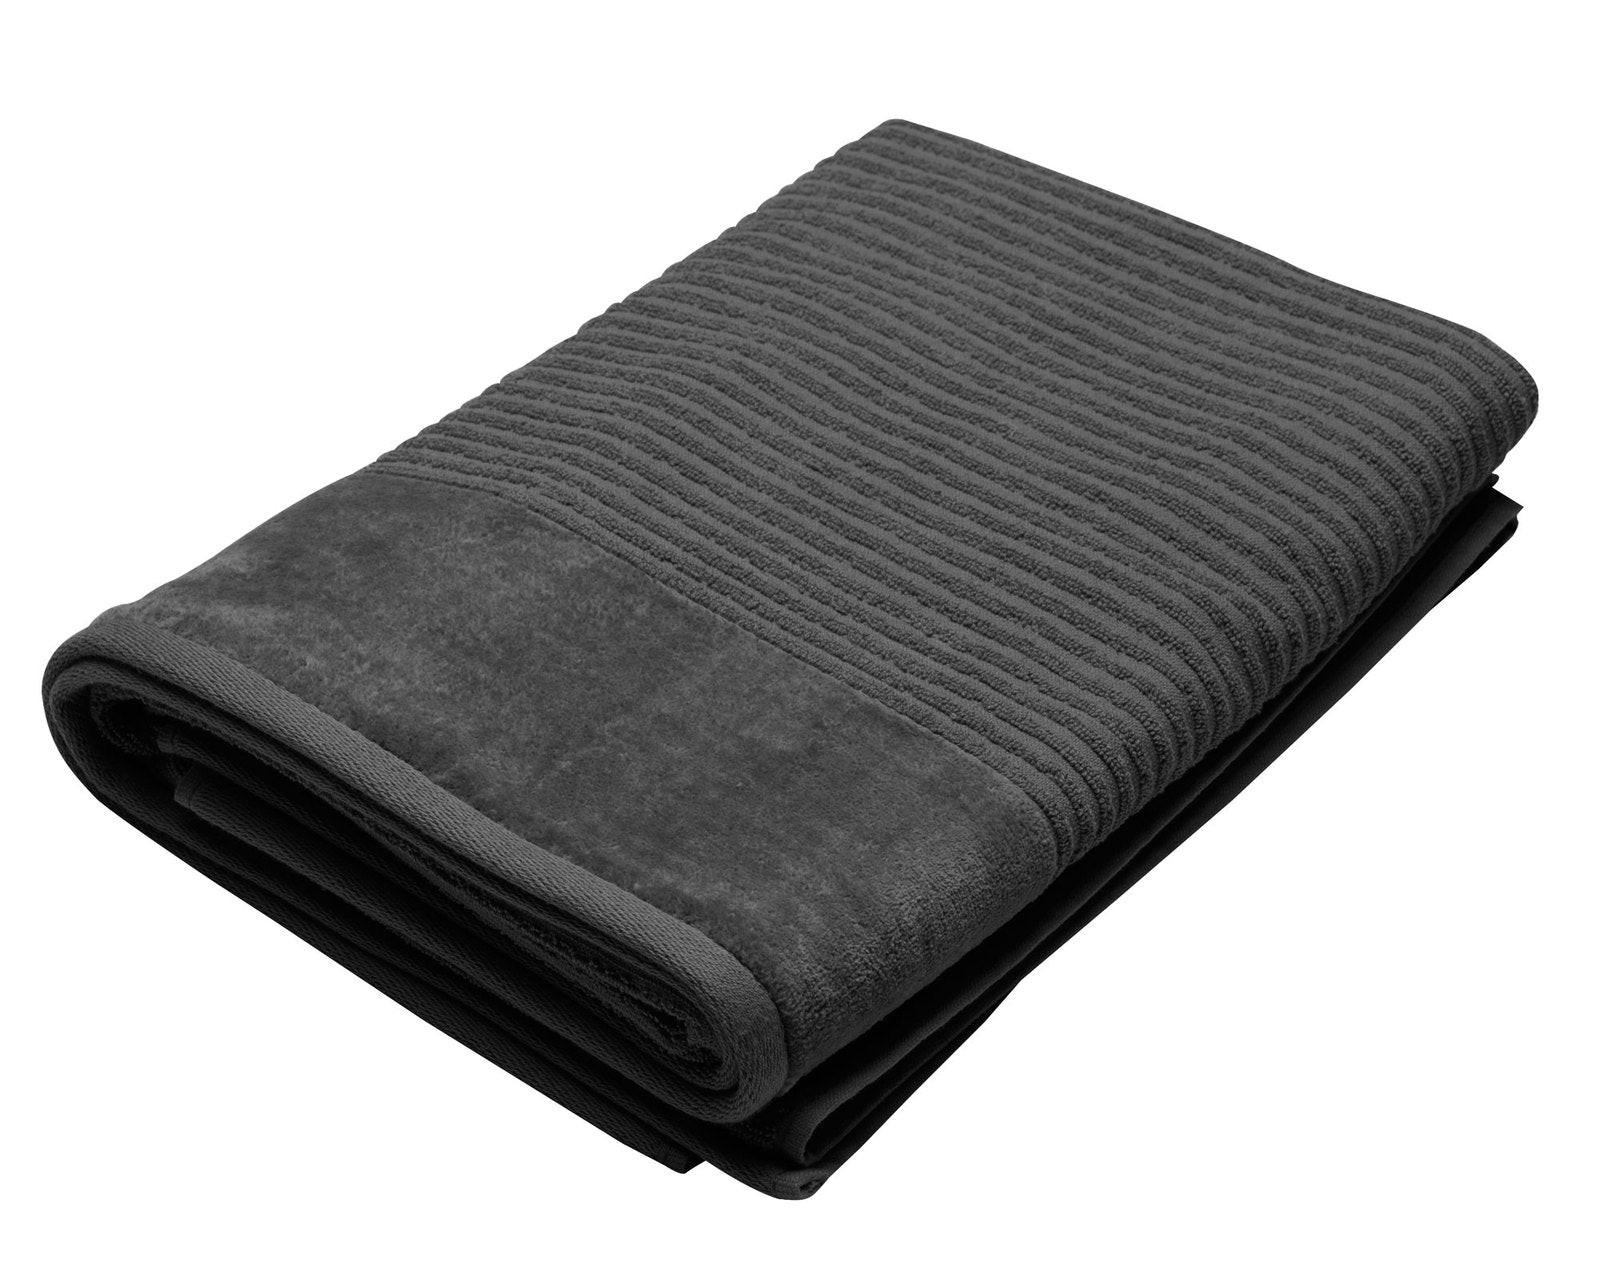 Jenny Mclean Royal Excellency Bath Towel 2 ply sheared Border 600GSM in Charcoal